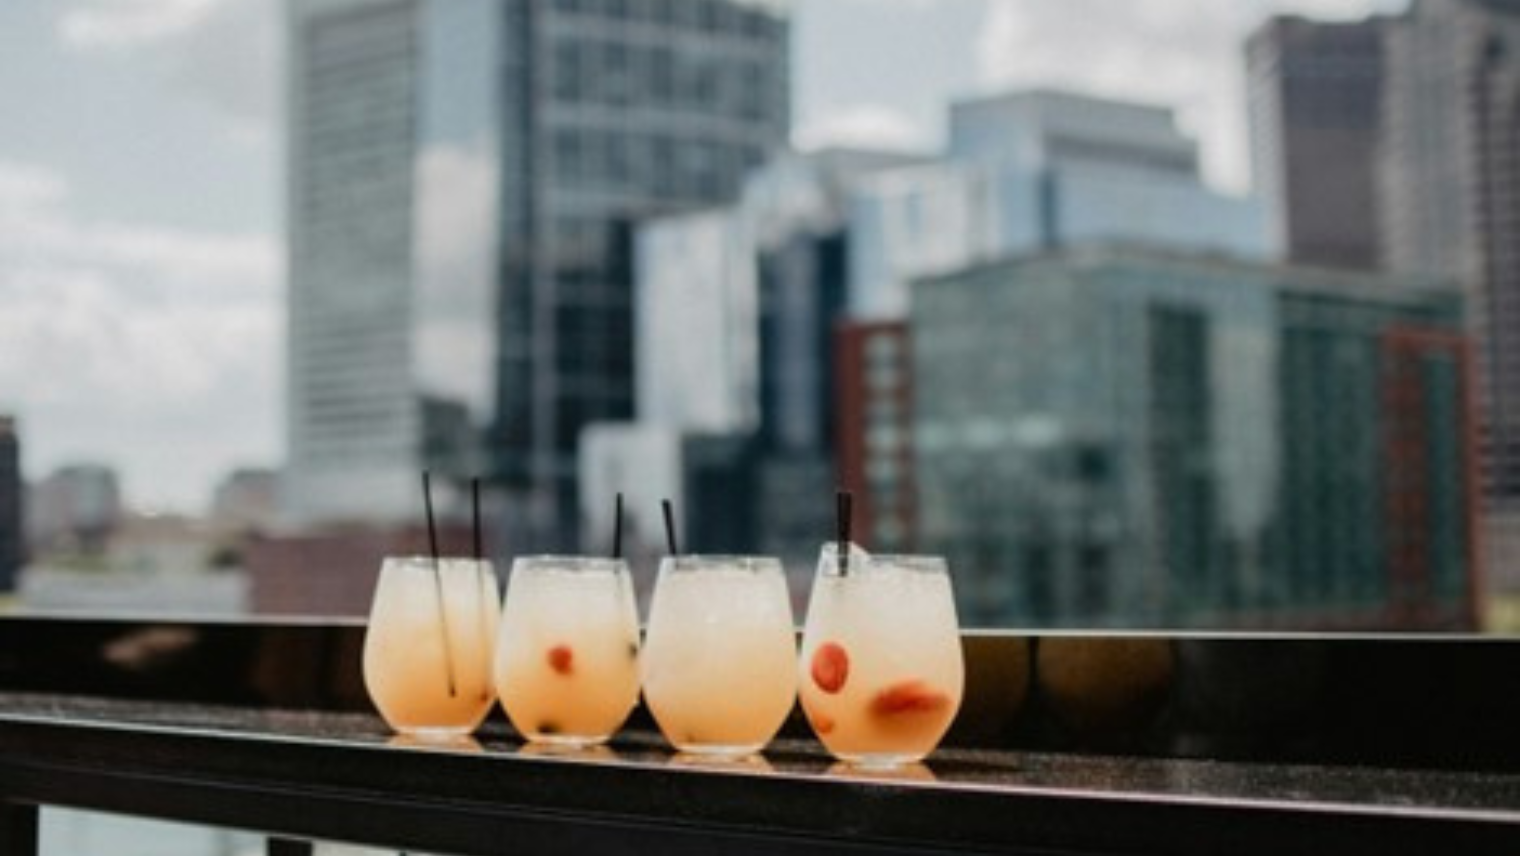 4 cocktails placed on a table overlooking London's skyline